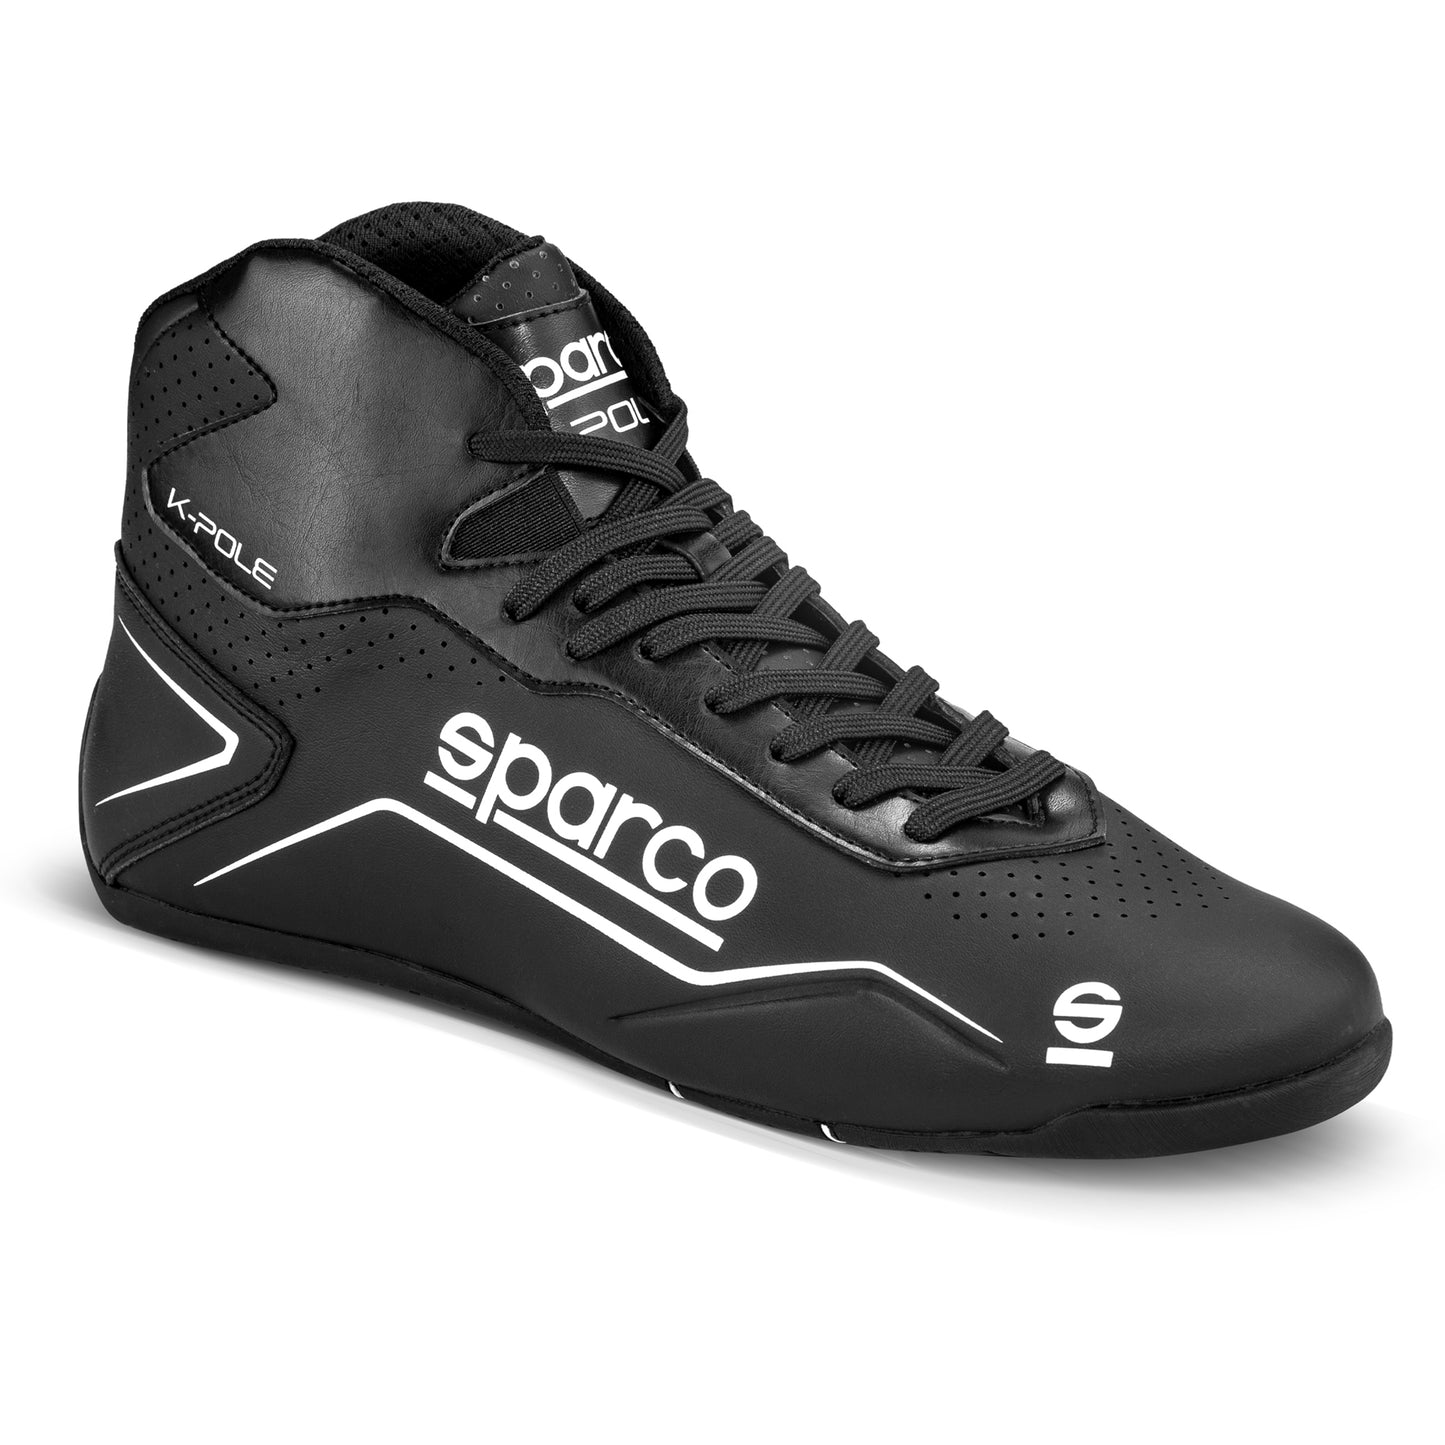 Sparco K-Pole Youth Karting Shoes